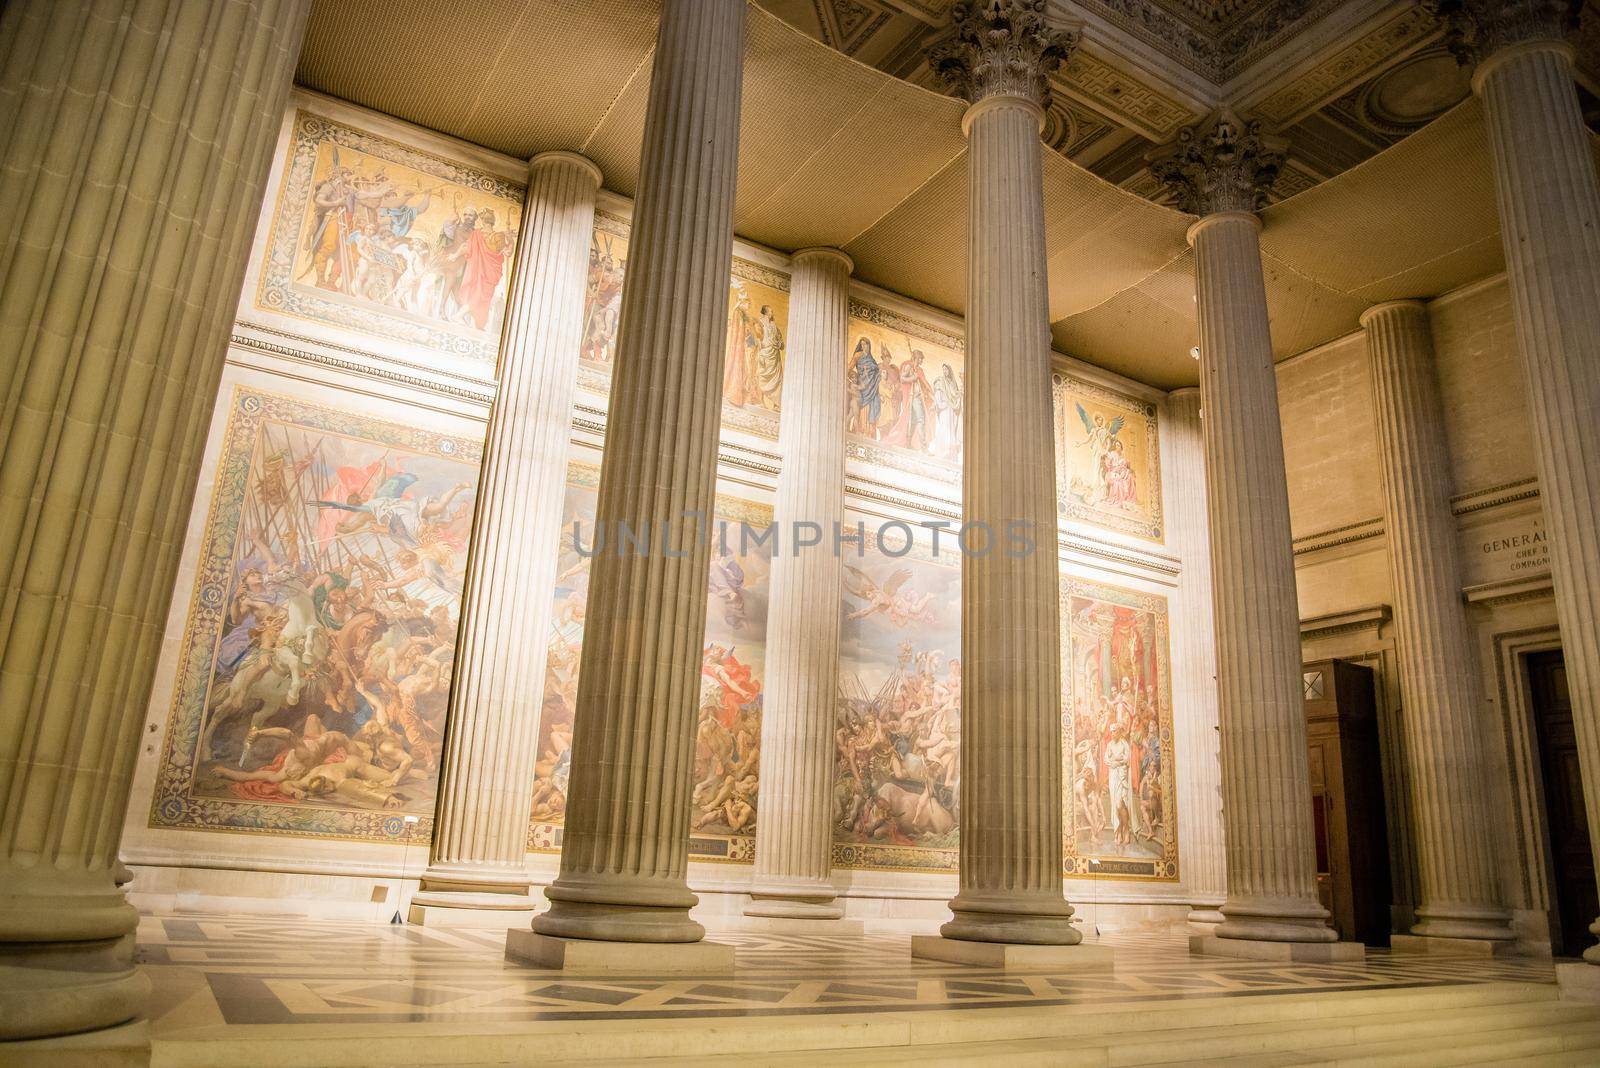 Paris, France Interior photo of tall pillars with colorful glowing art murals in the background in a Paris art museum. by jyurinko